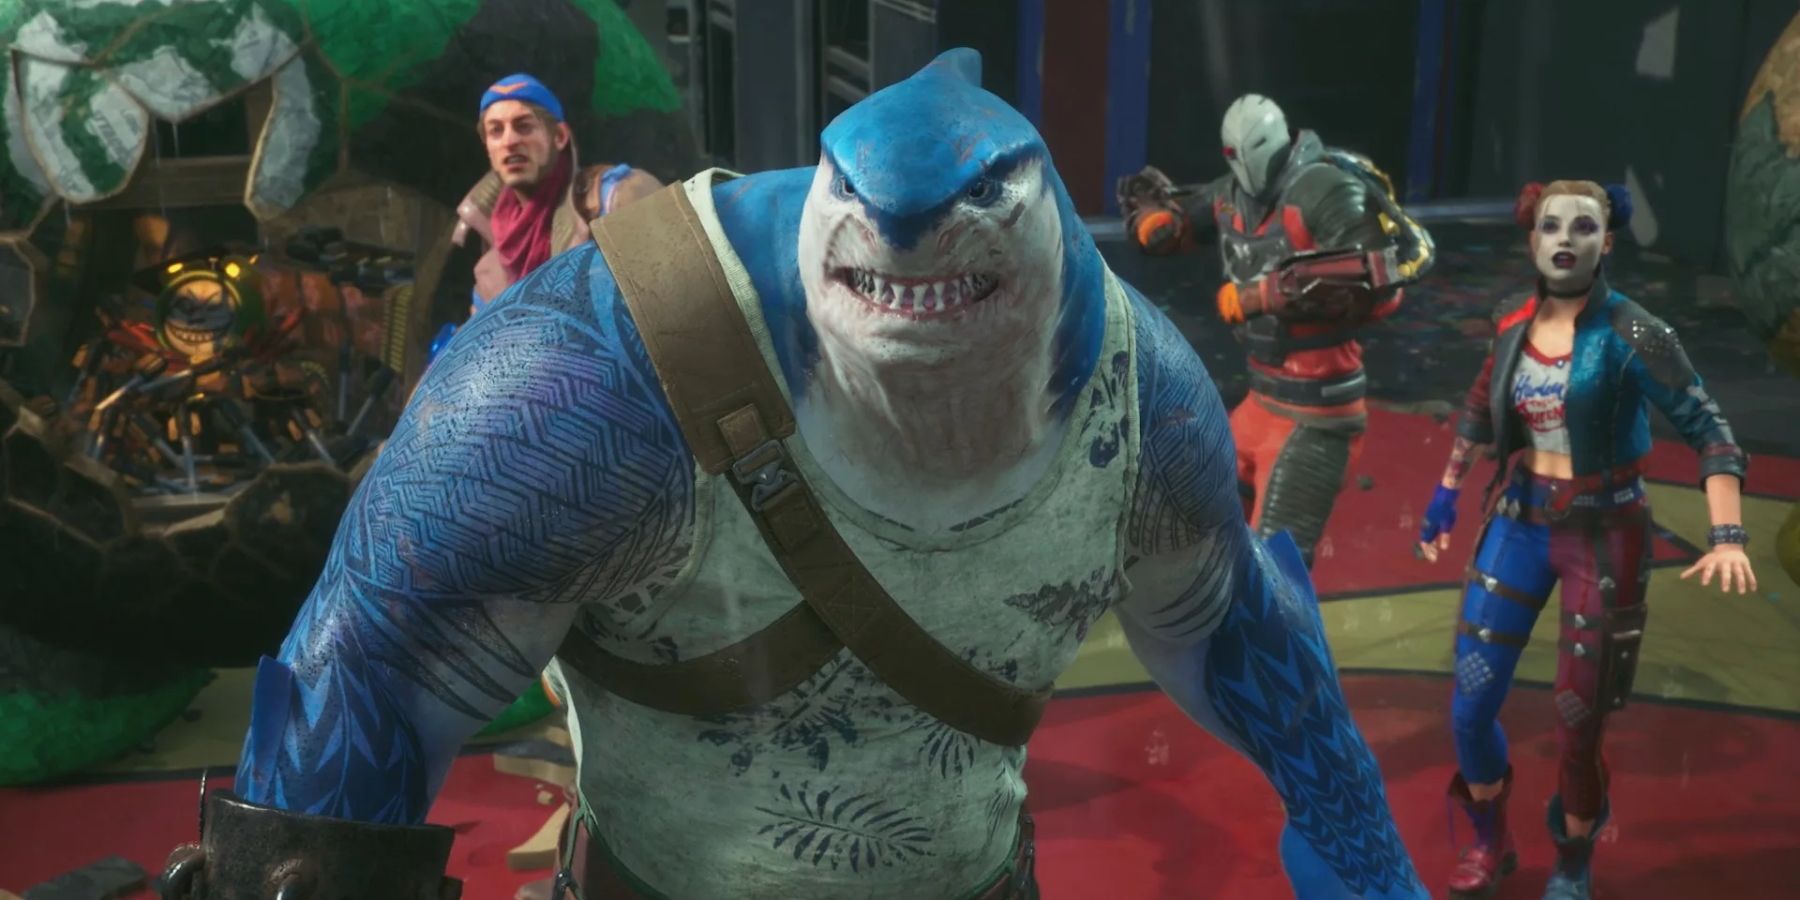 King Shark standing in front of the Suicide Squad